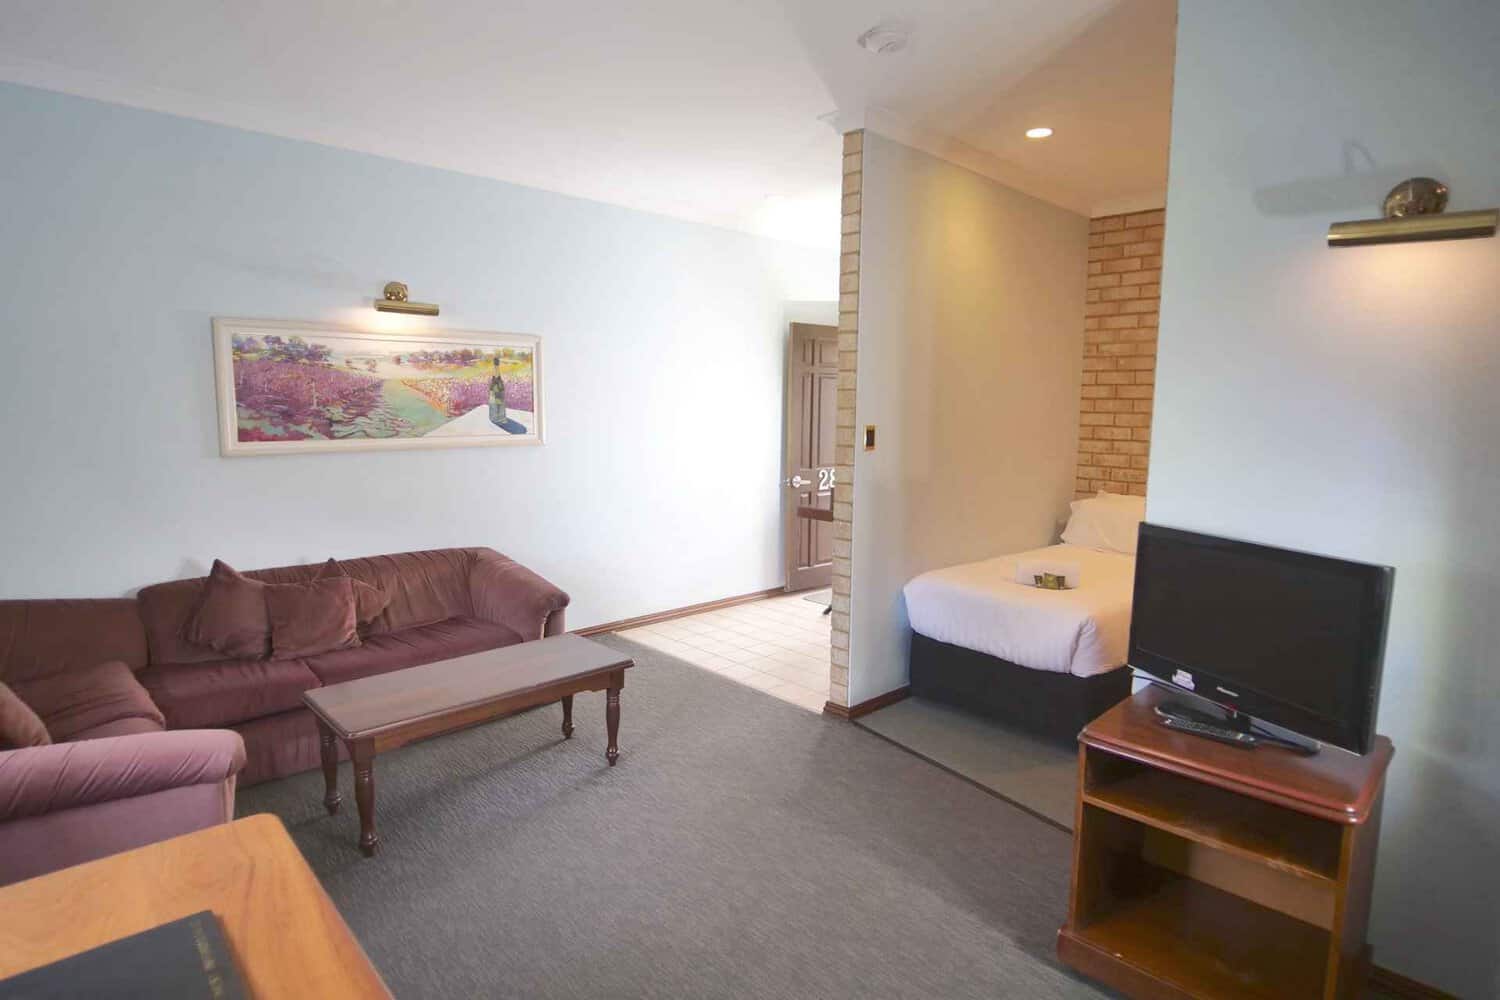 Inviting hotel loungeroom featuring cozy couches, a coffee table, television for entertainment, and a single bed, with an open door leading to additional spaces, complemented by a beautiful painting of a vineyard on the wall, creating a welcoming atmosphere for extended stays